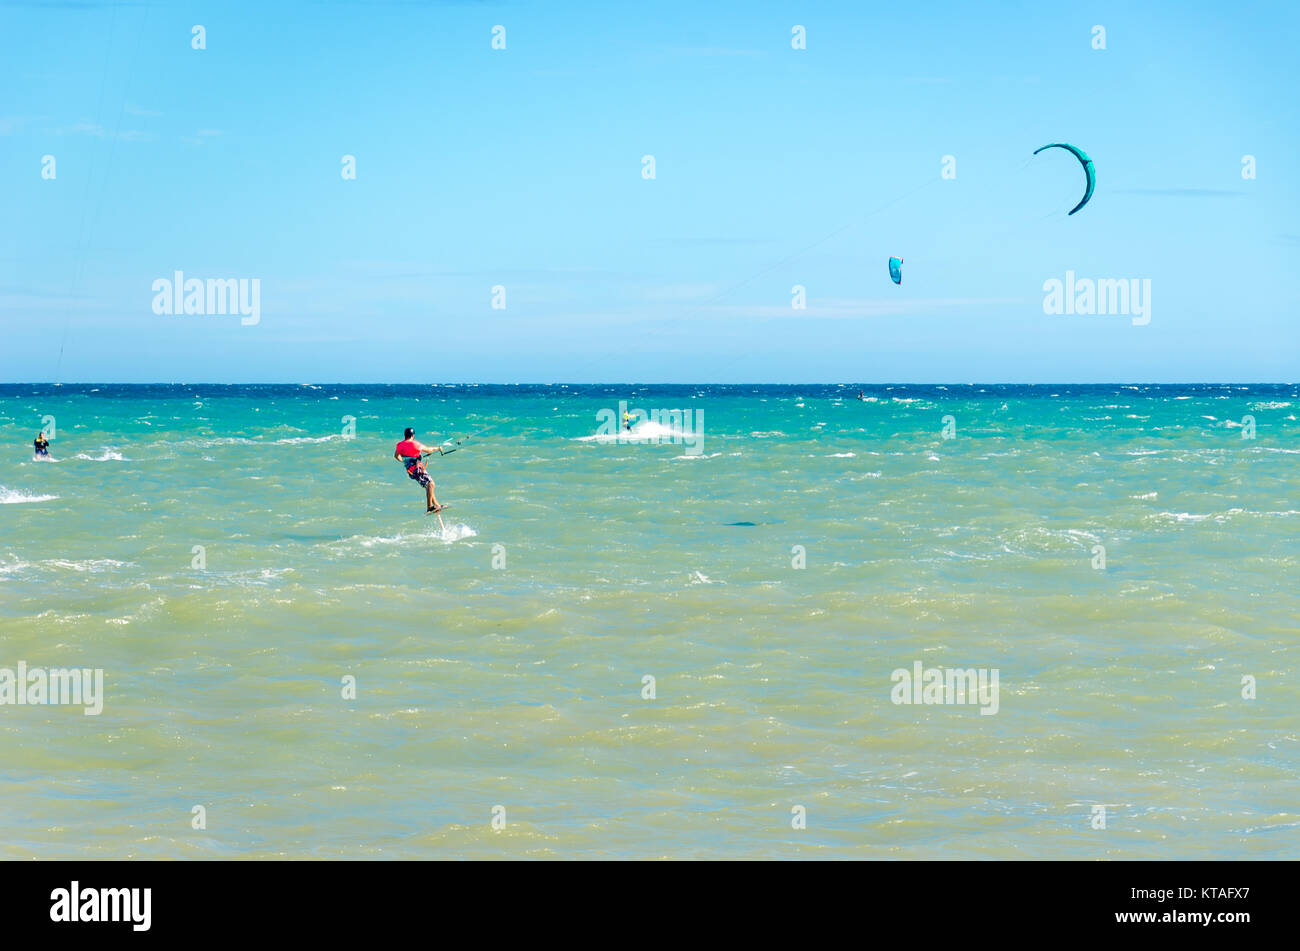 Cumbuco, Brazil, jul 9, 2017: Beach in Cumbuco at the Ceara state with multiple kite surfing sport people Stock Photo